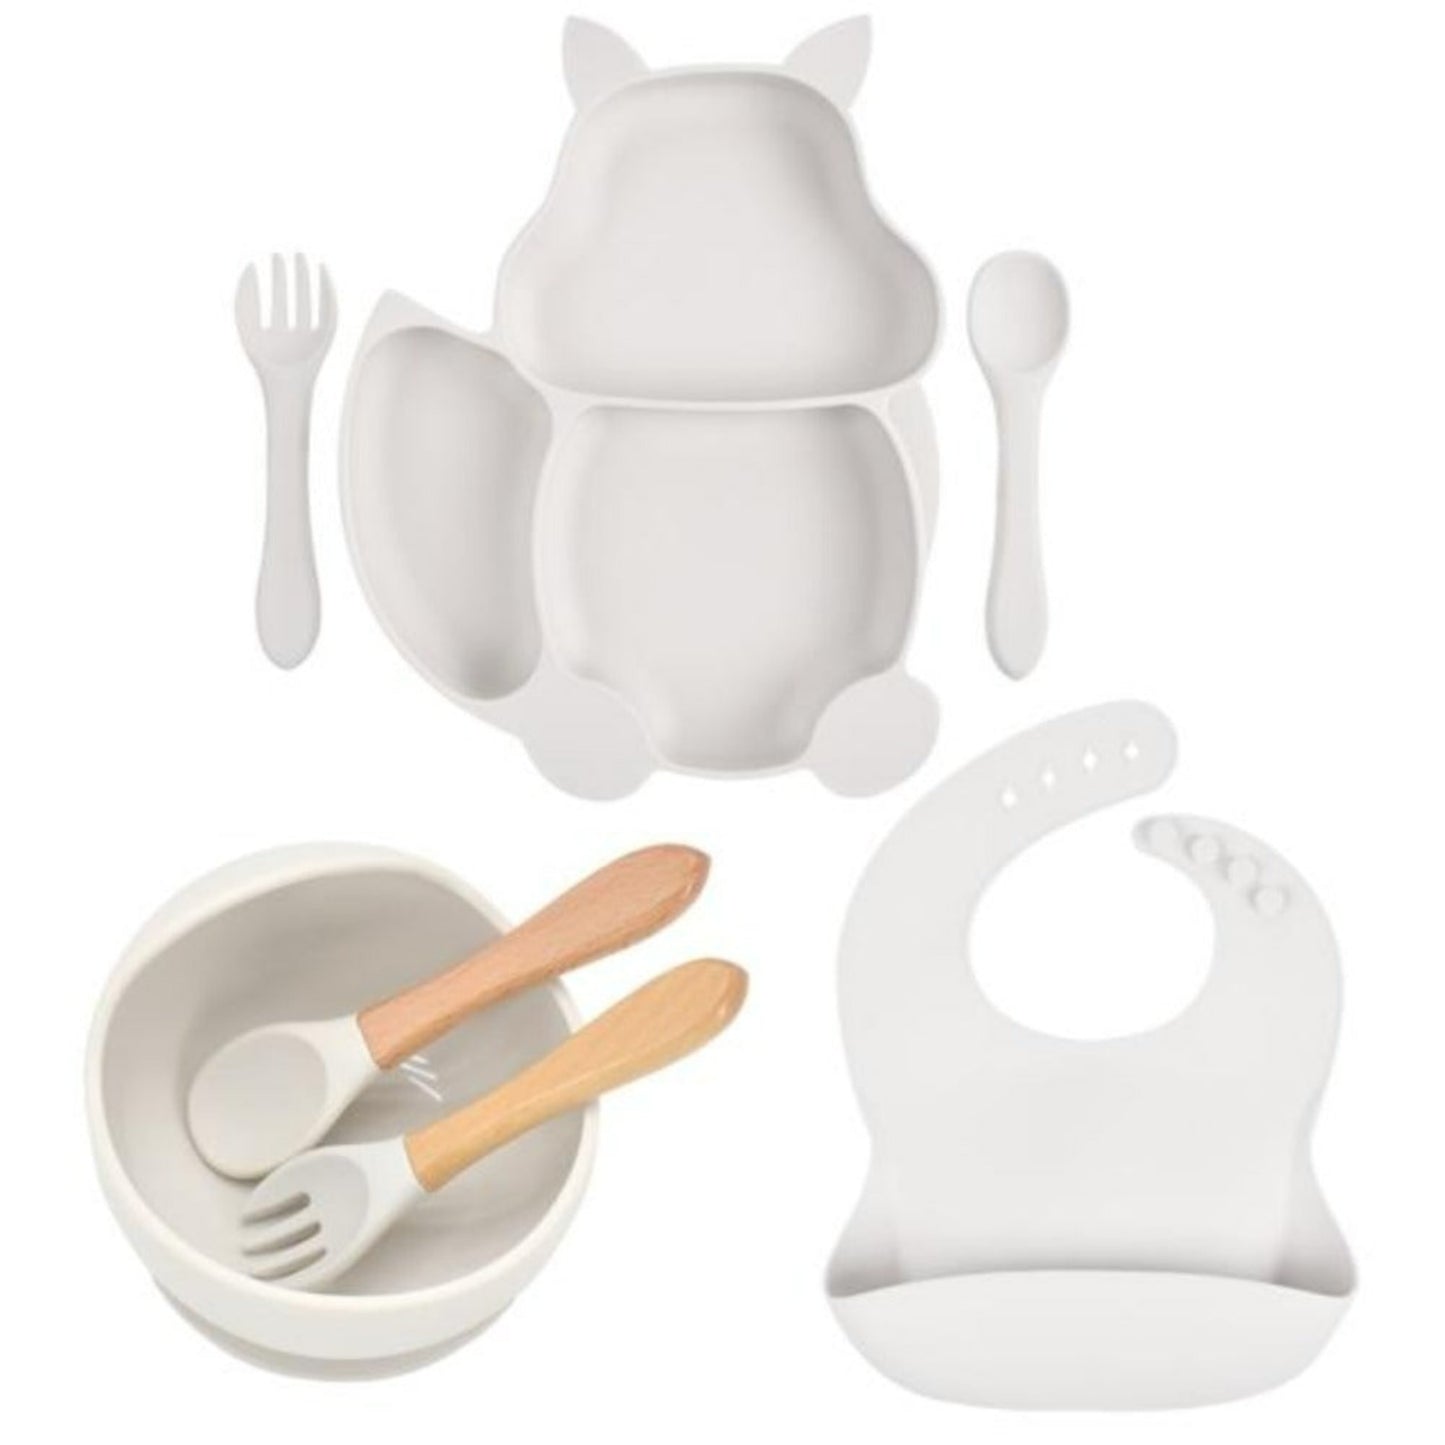 Children Book - Cub-E finds Home – Welcome to Cuddle Spoons: A Helpful  Eating Aid for the Disabled, Elderly & Children to a Fun Keepsake Gift for  Couples & Singles.